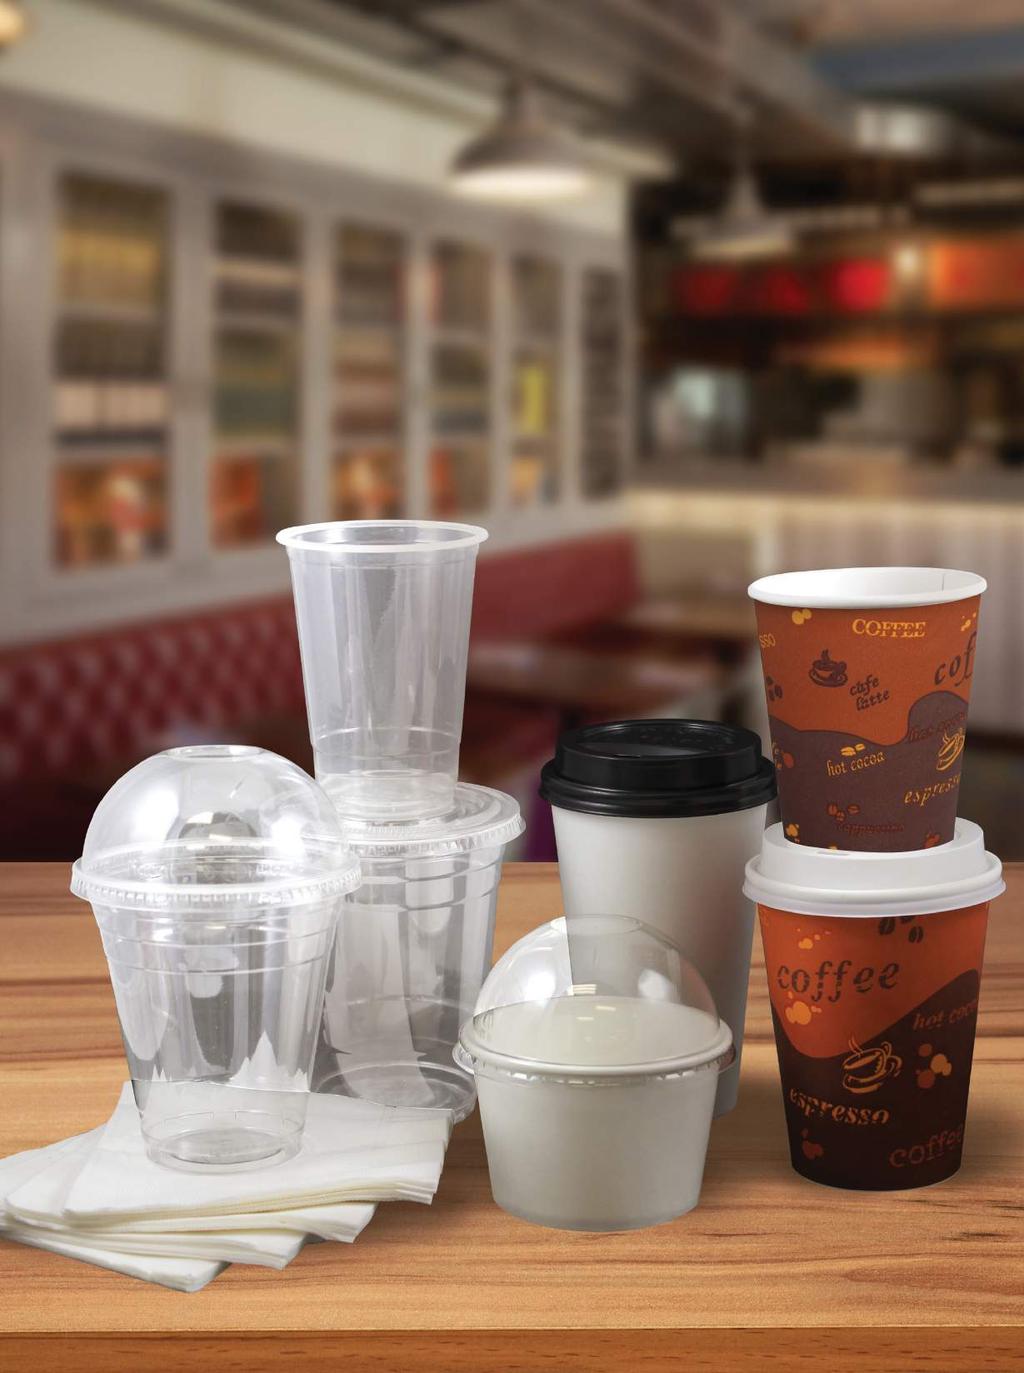 Food Service and Beverage Disposables 5 PET Cold Cups & Lids 19 Cup Accessories 30 Cutlery 7 PolyPro & PP Cold Cups & Lids 20 Paper Food Containers & Lids 33 Napkins 10 Paper Cold Cups & Lids 22 Food